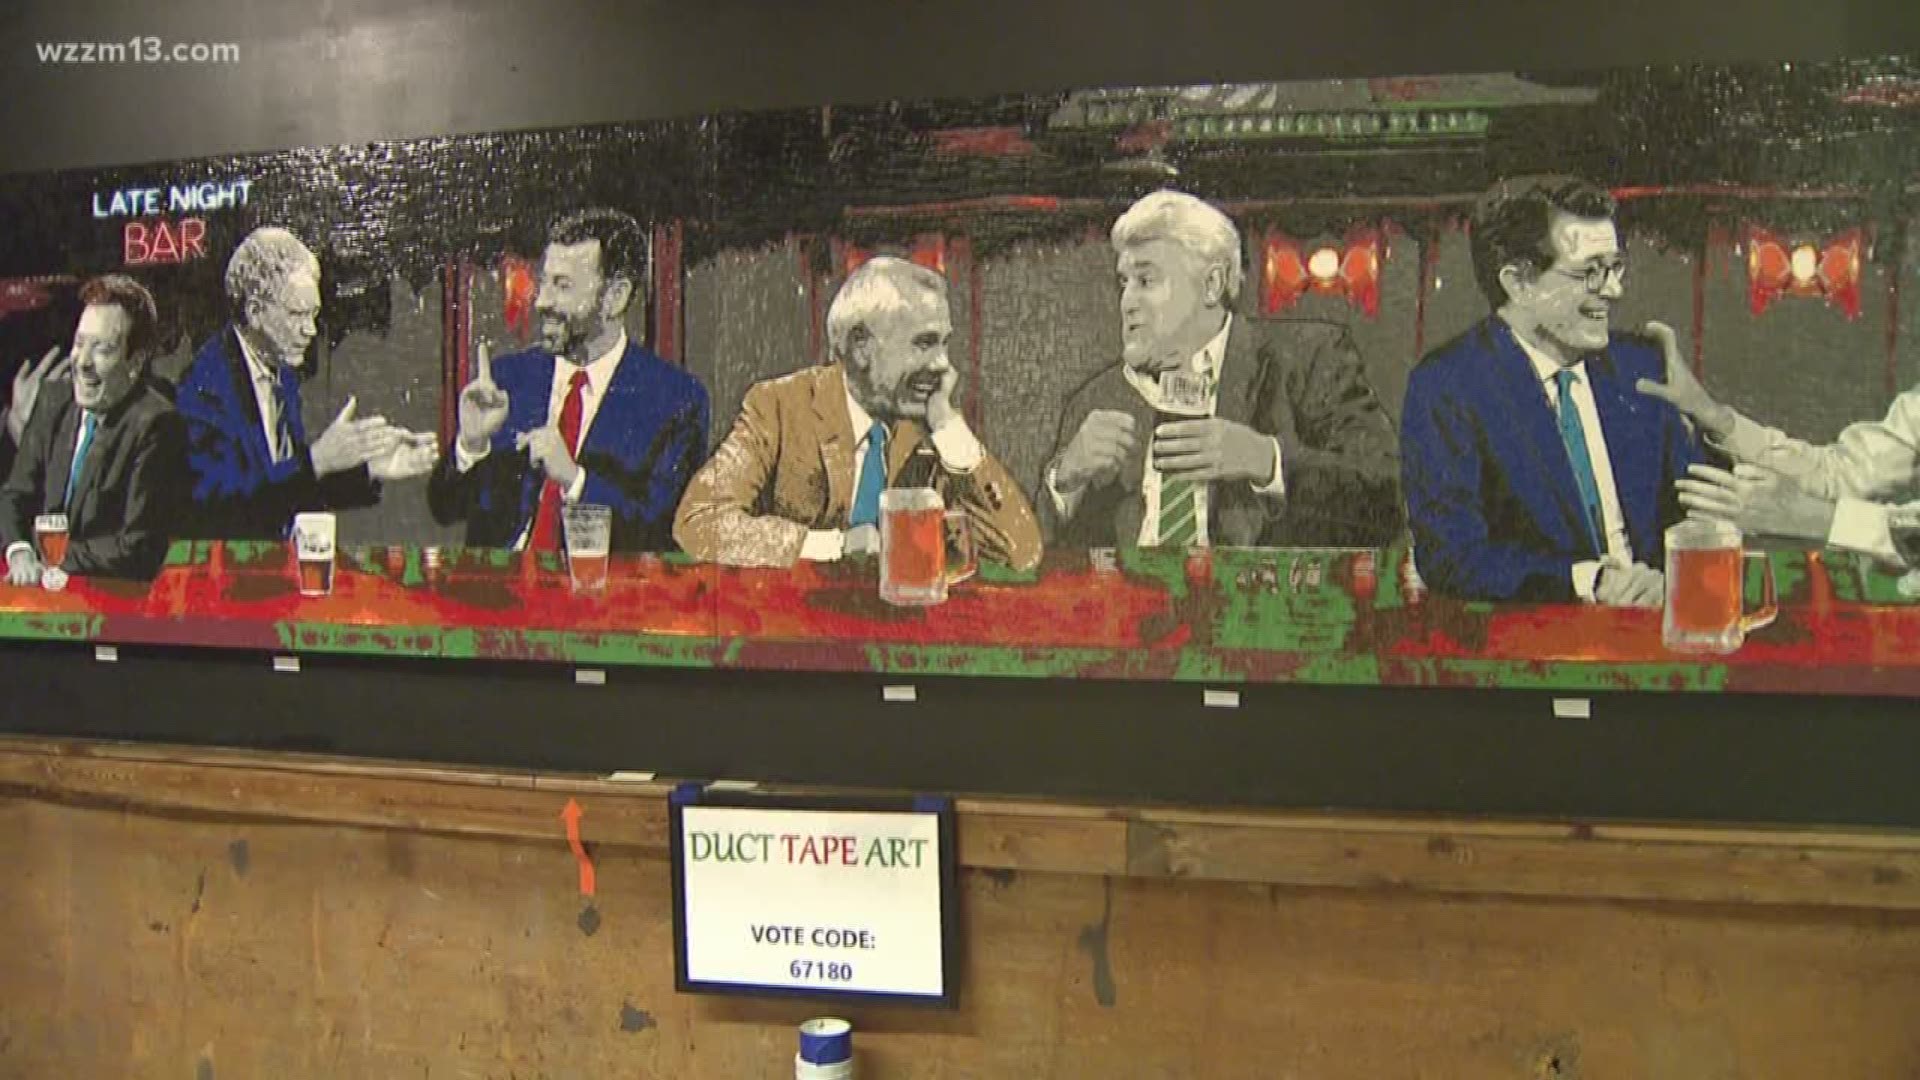 ArtPrize: Kings of the Late Night